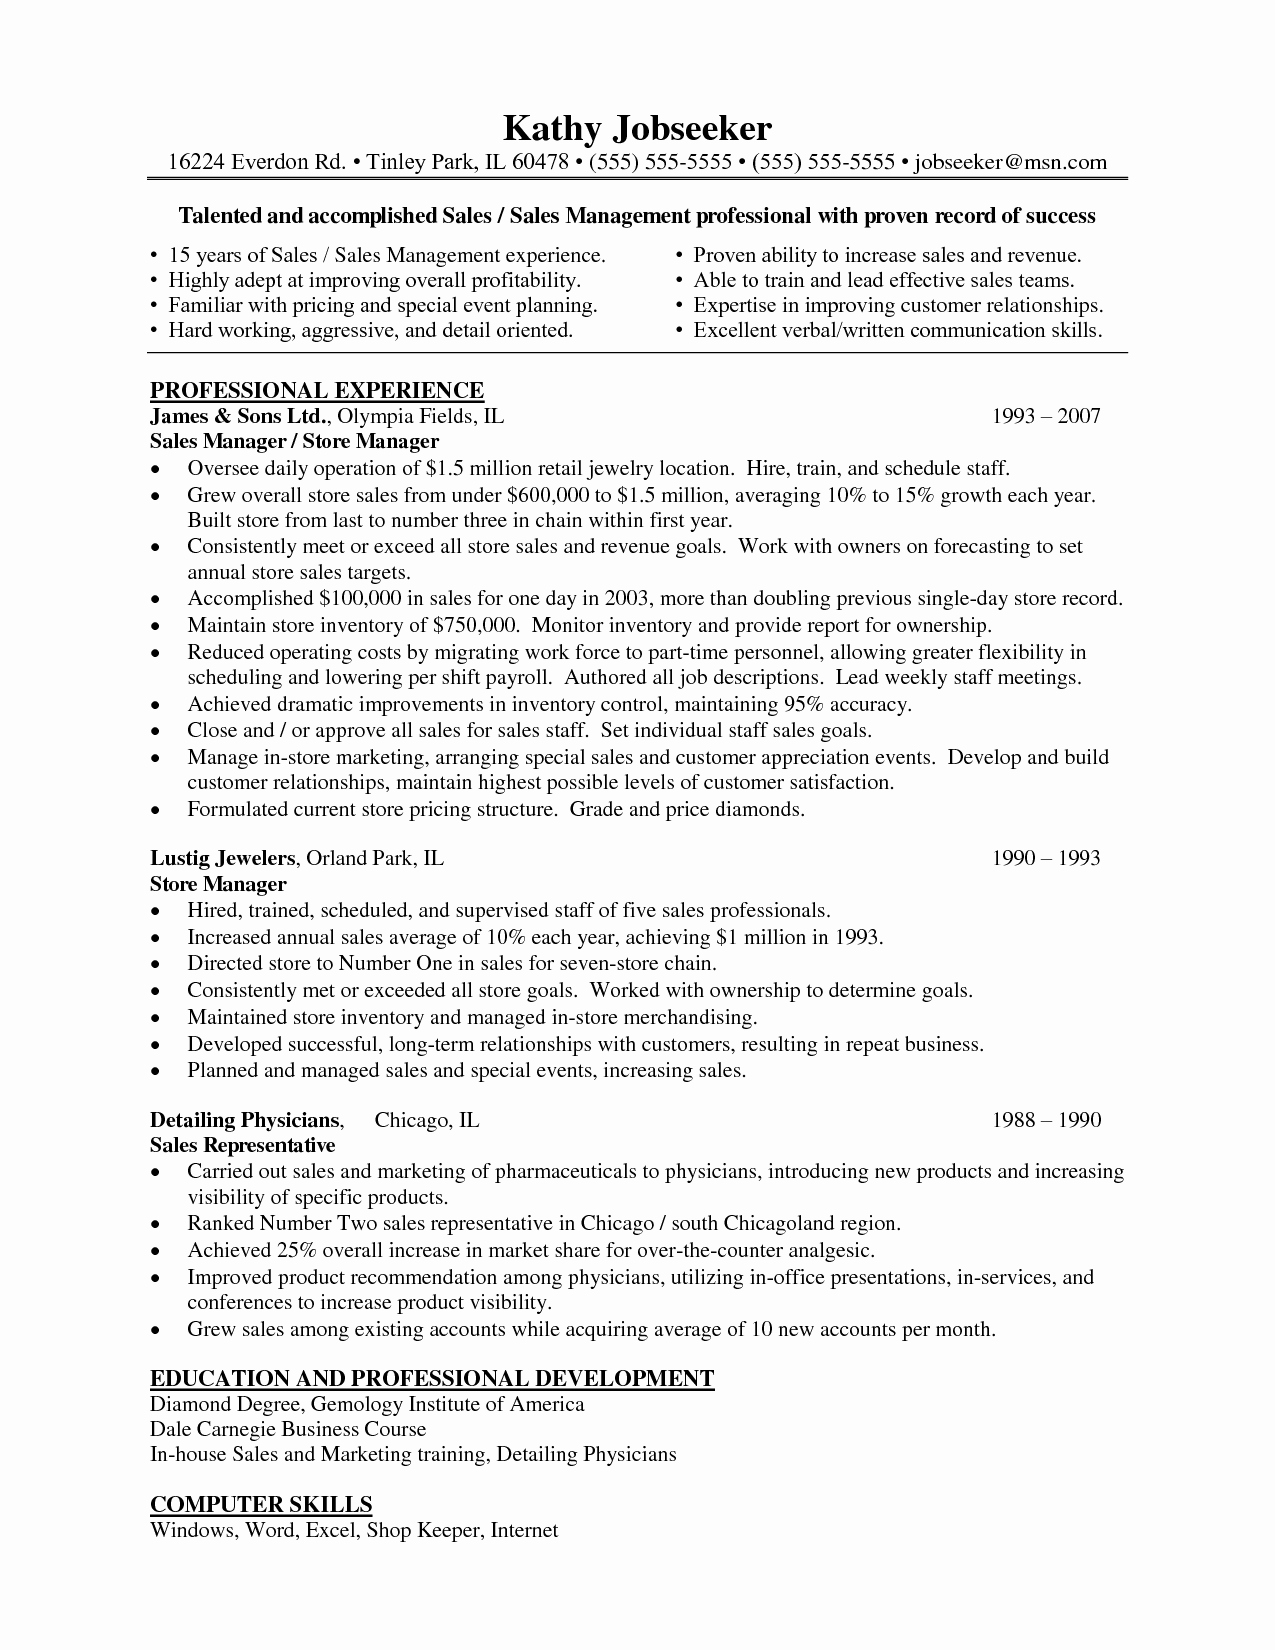 Resume Examples for Retail Store Manager